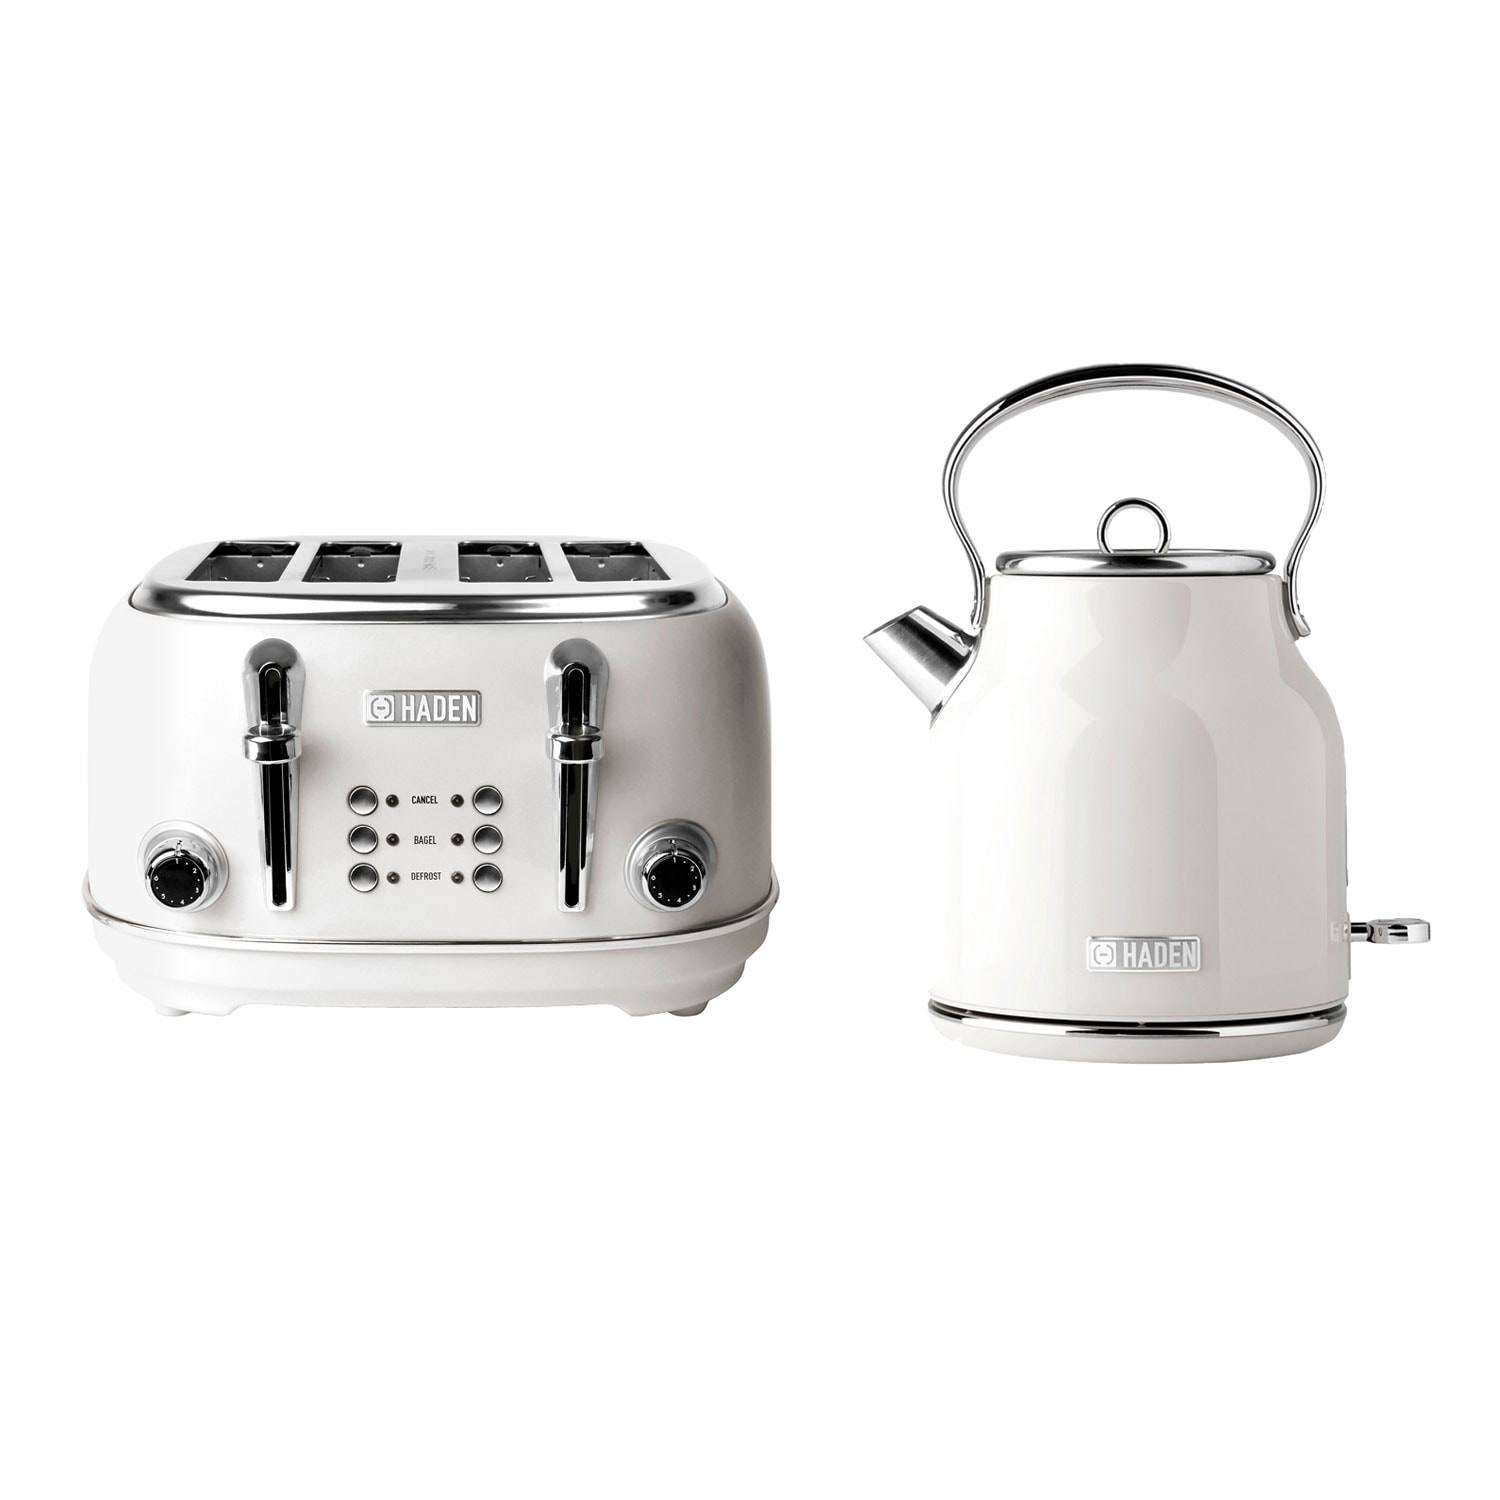 https://ak1.ostkcdn.com/images/products/is/images/direct/40ccdf3999010814c1c2bfdafdc778f8223a0d15/Haden-Heritage-1.7-Liter-Electric-Tea-Kettle-%26-4-Slice-Wide-Slot-Toaster%2C-White.jpg